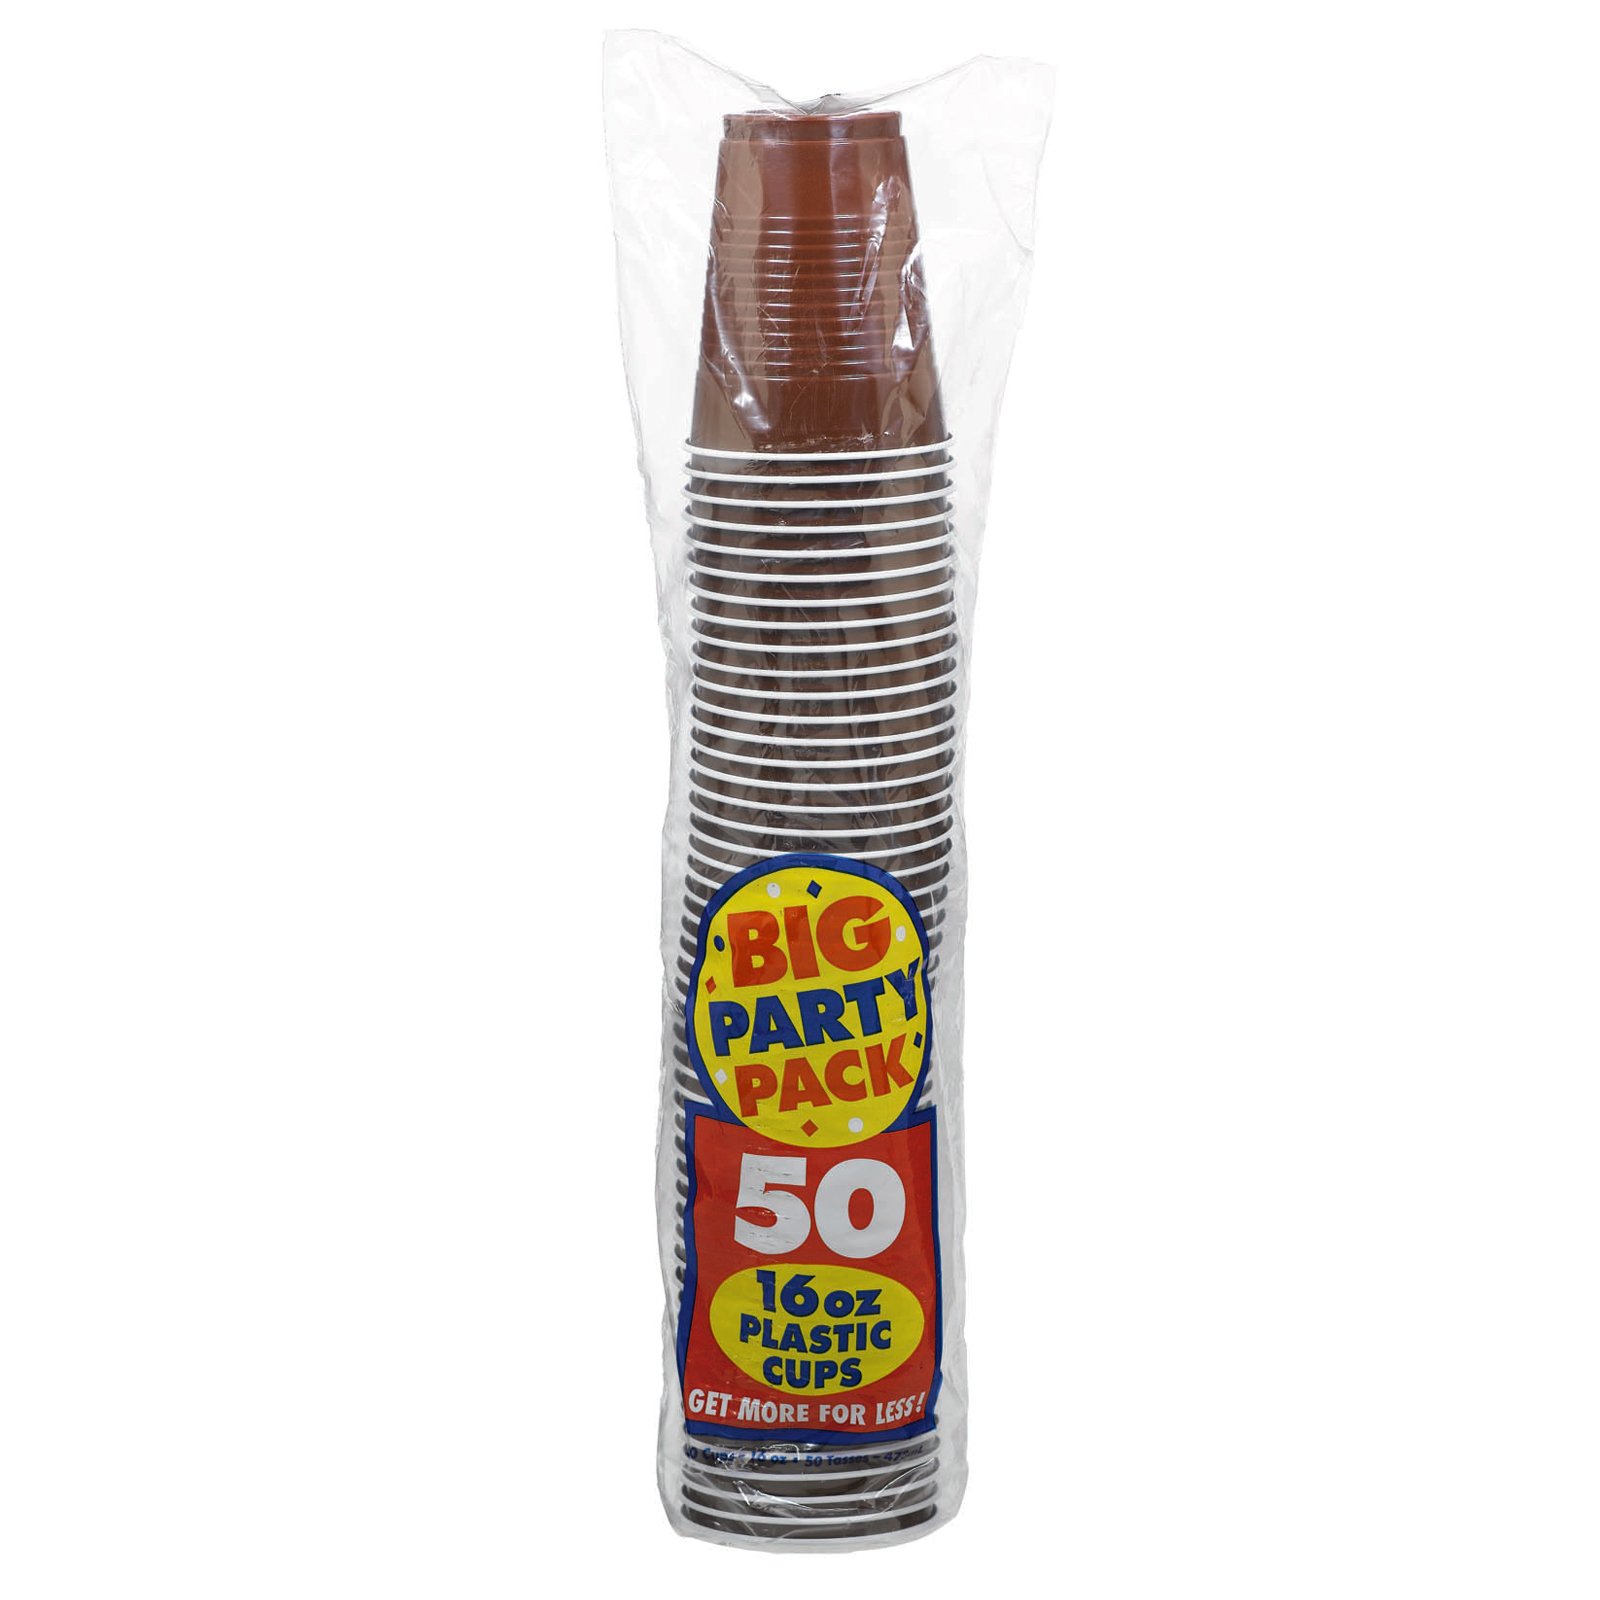 Chocolate Brown Big Party Pack - 16 oz. Plastic Cups (50 count) - Click Image to Close